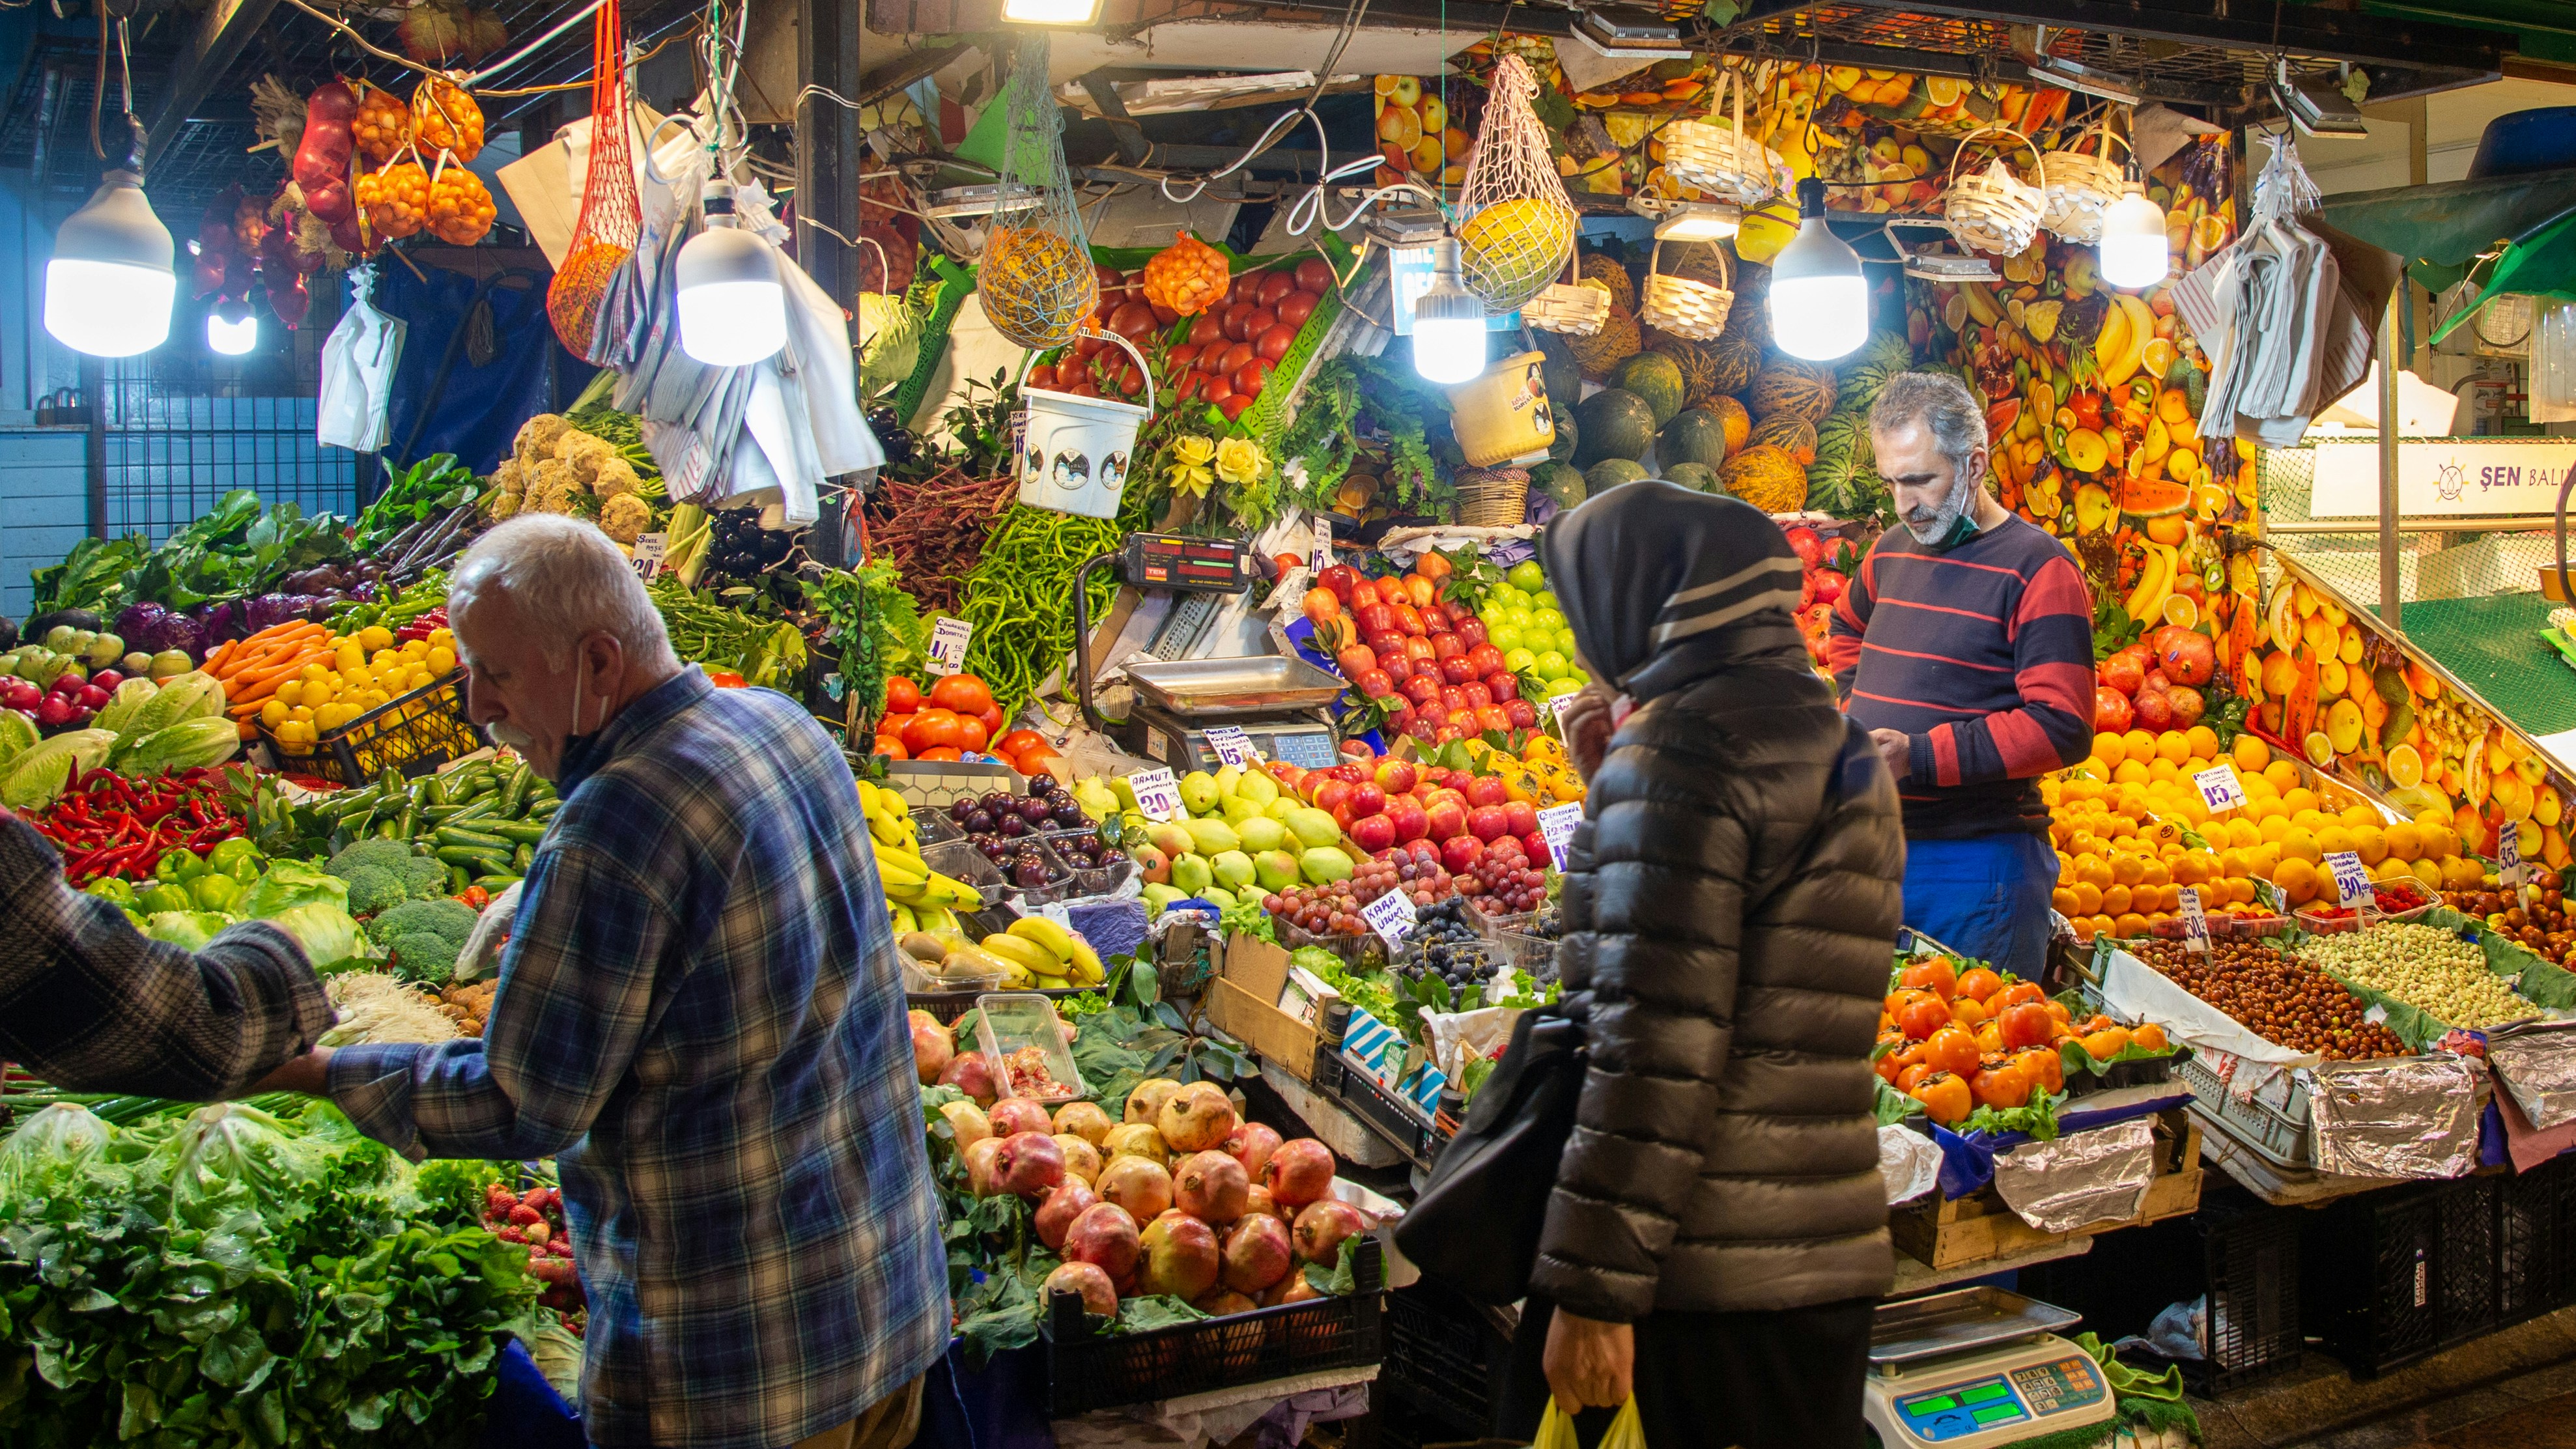 A greengrocer shop in Kadıköy, Istanbul. People doing market shopping.